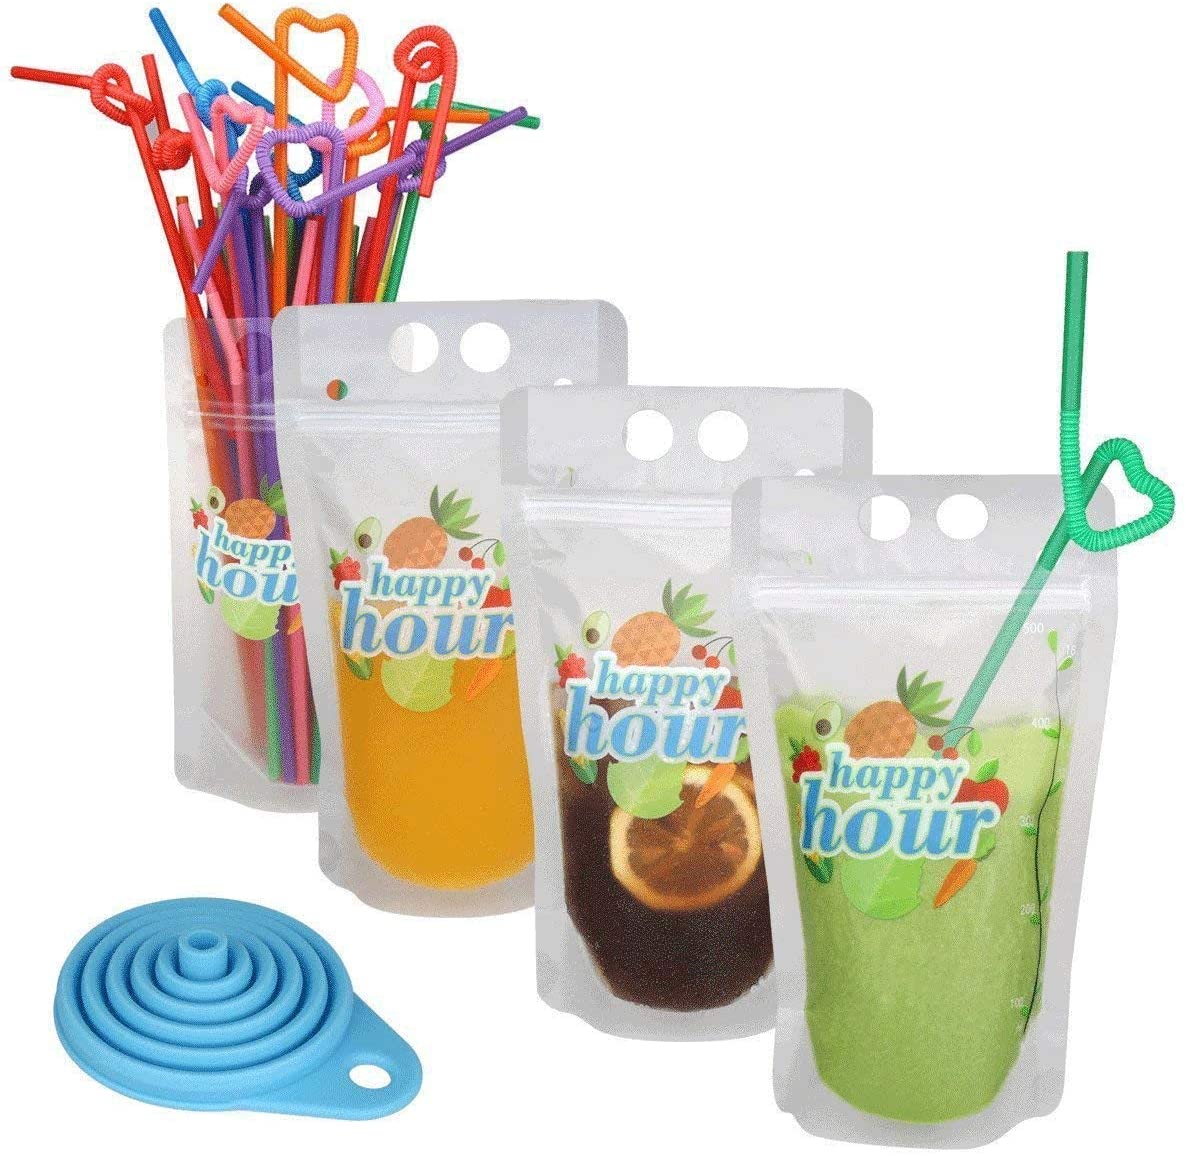 Zipper Plastic Pouches Drink Bags, Heavy Duty Hand-Held Translucent Frosted Reclosable Stand-up Bag 2.4" Bottom Gusset with 120 pcs Straws & Funnel Included